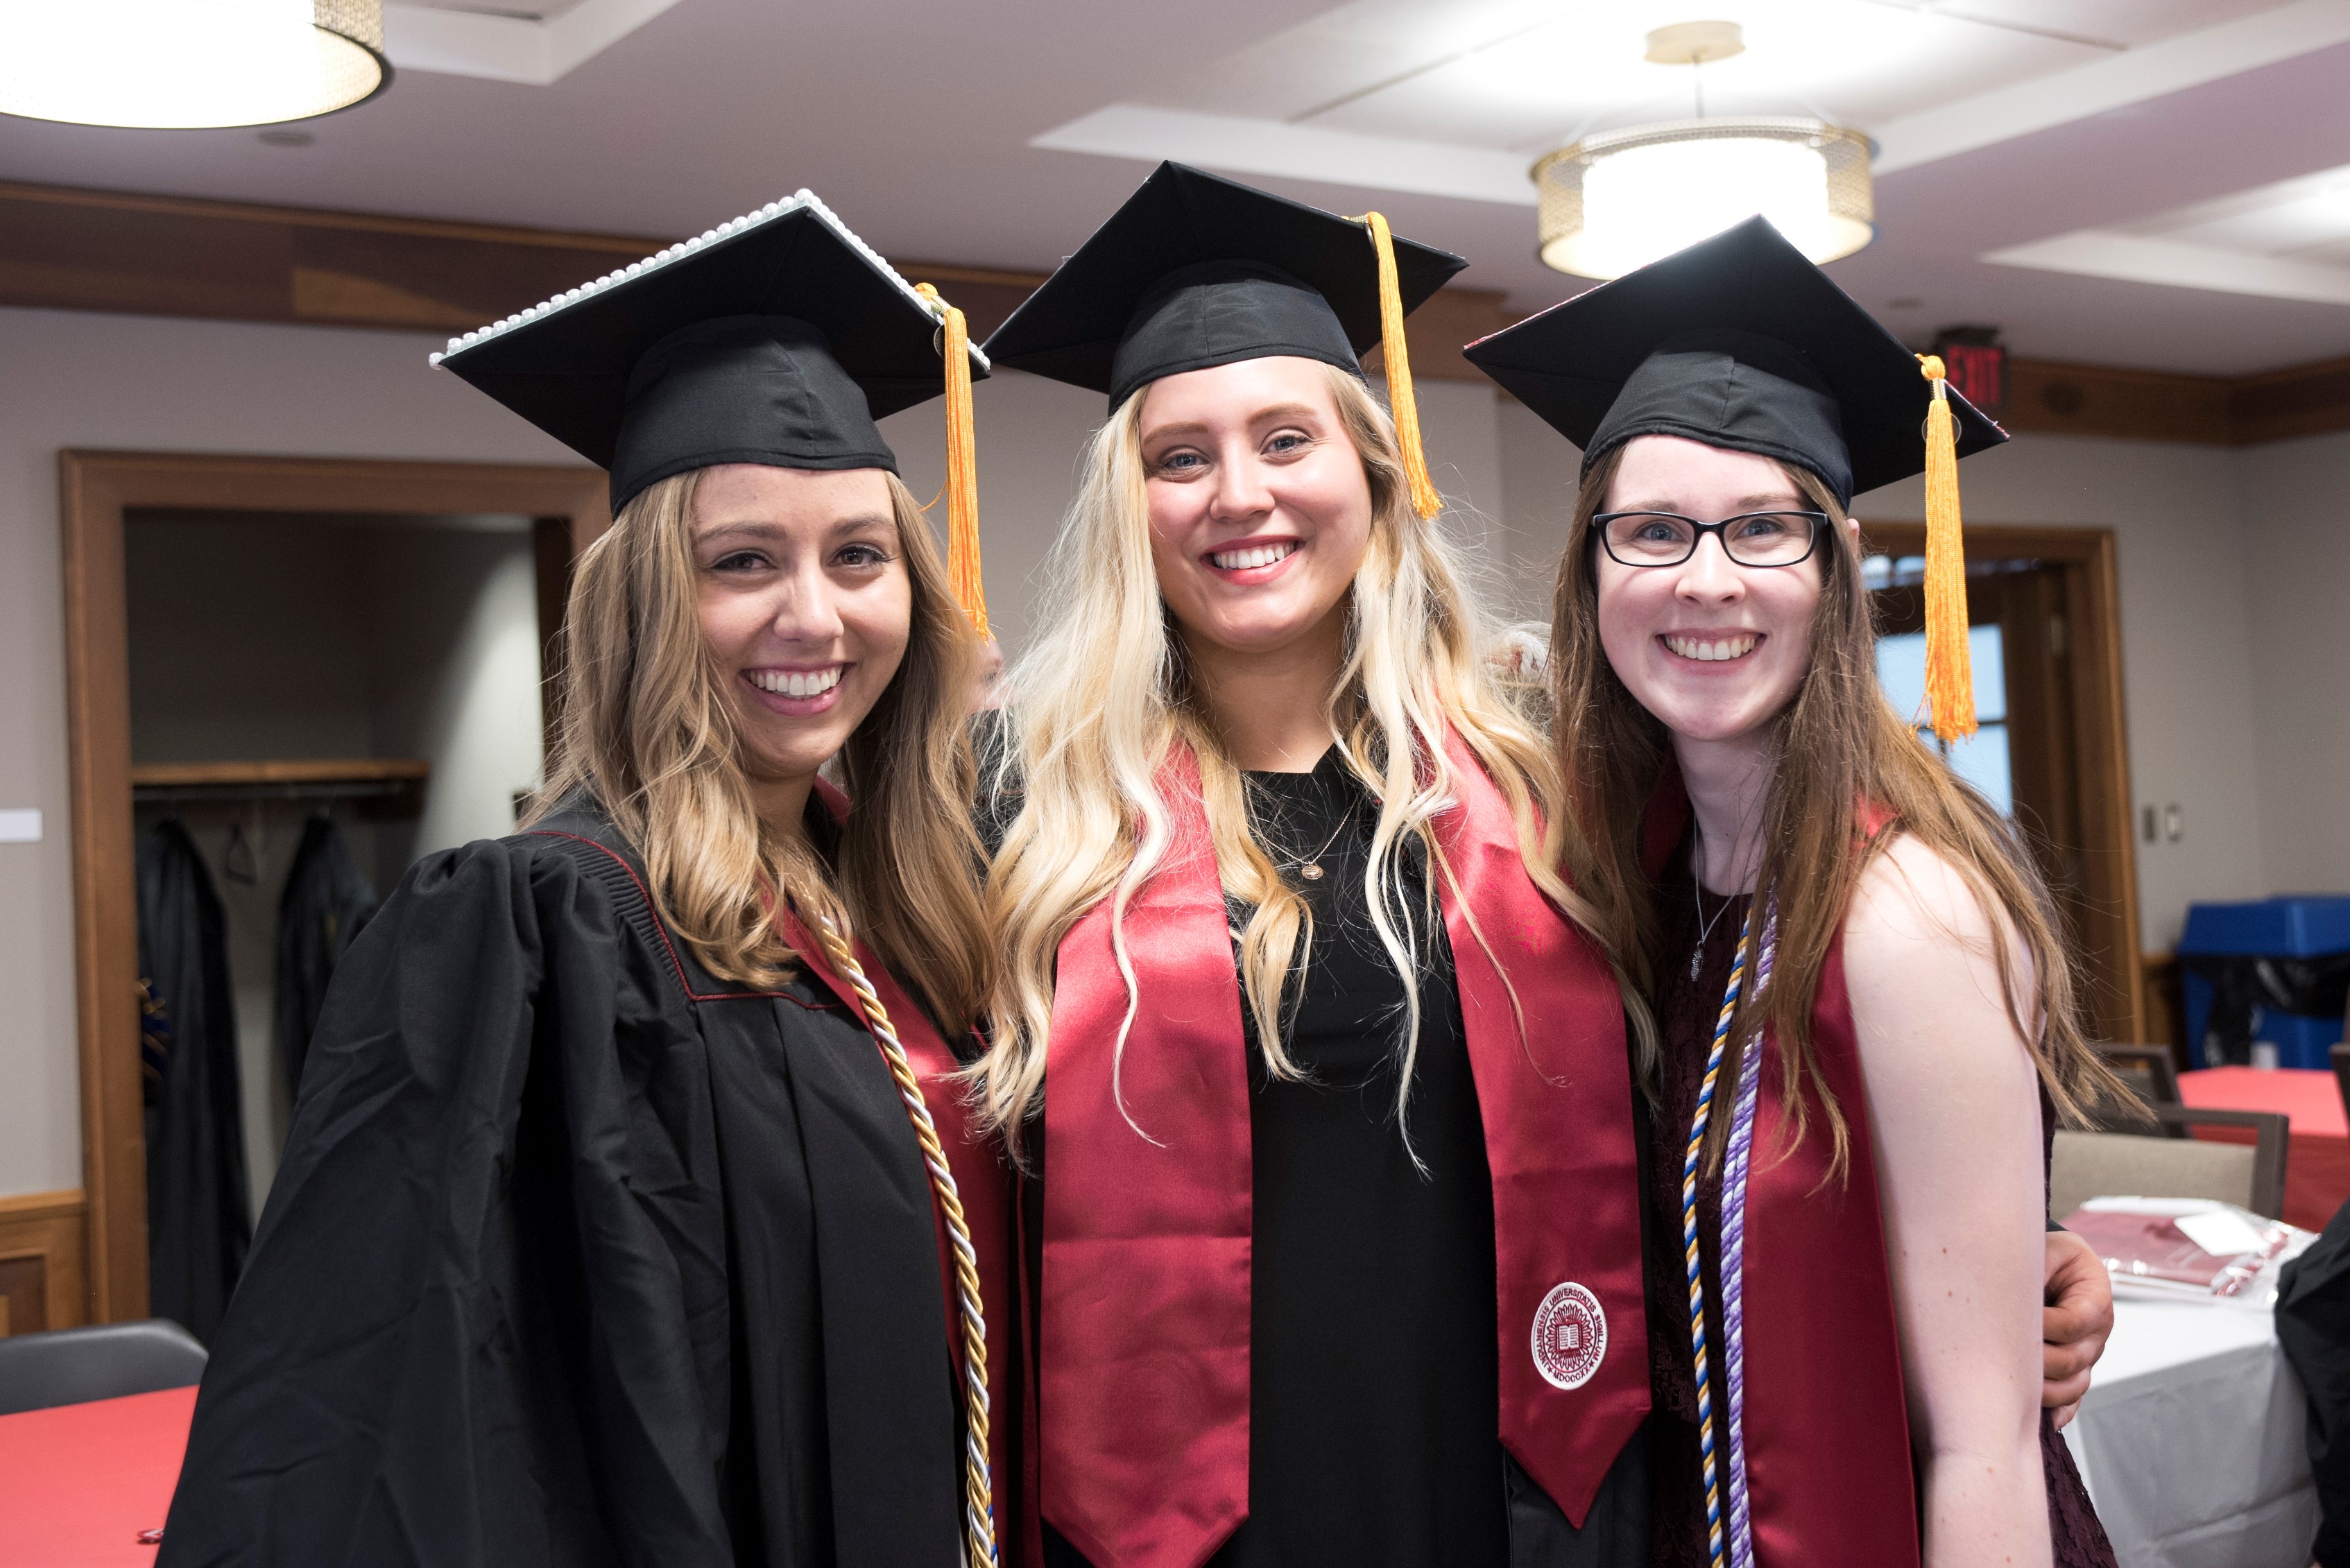 Three students in caps and gowns smiling at camera